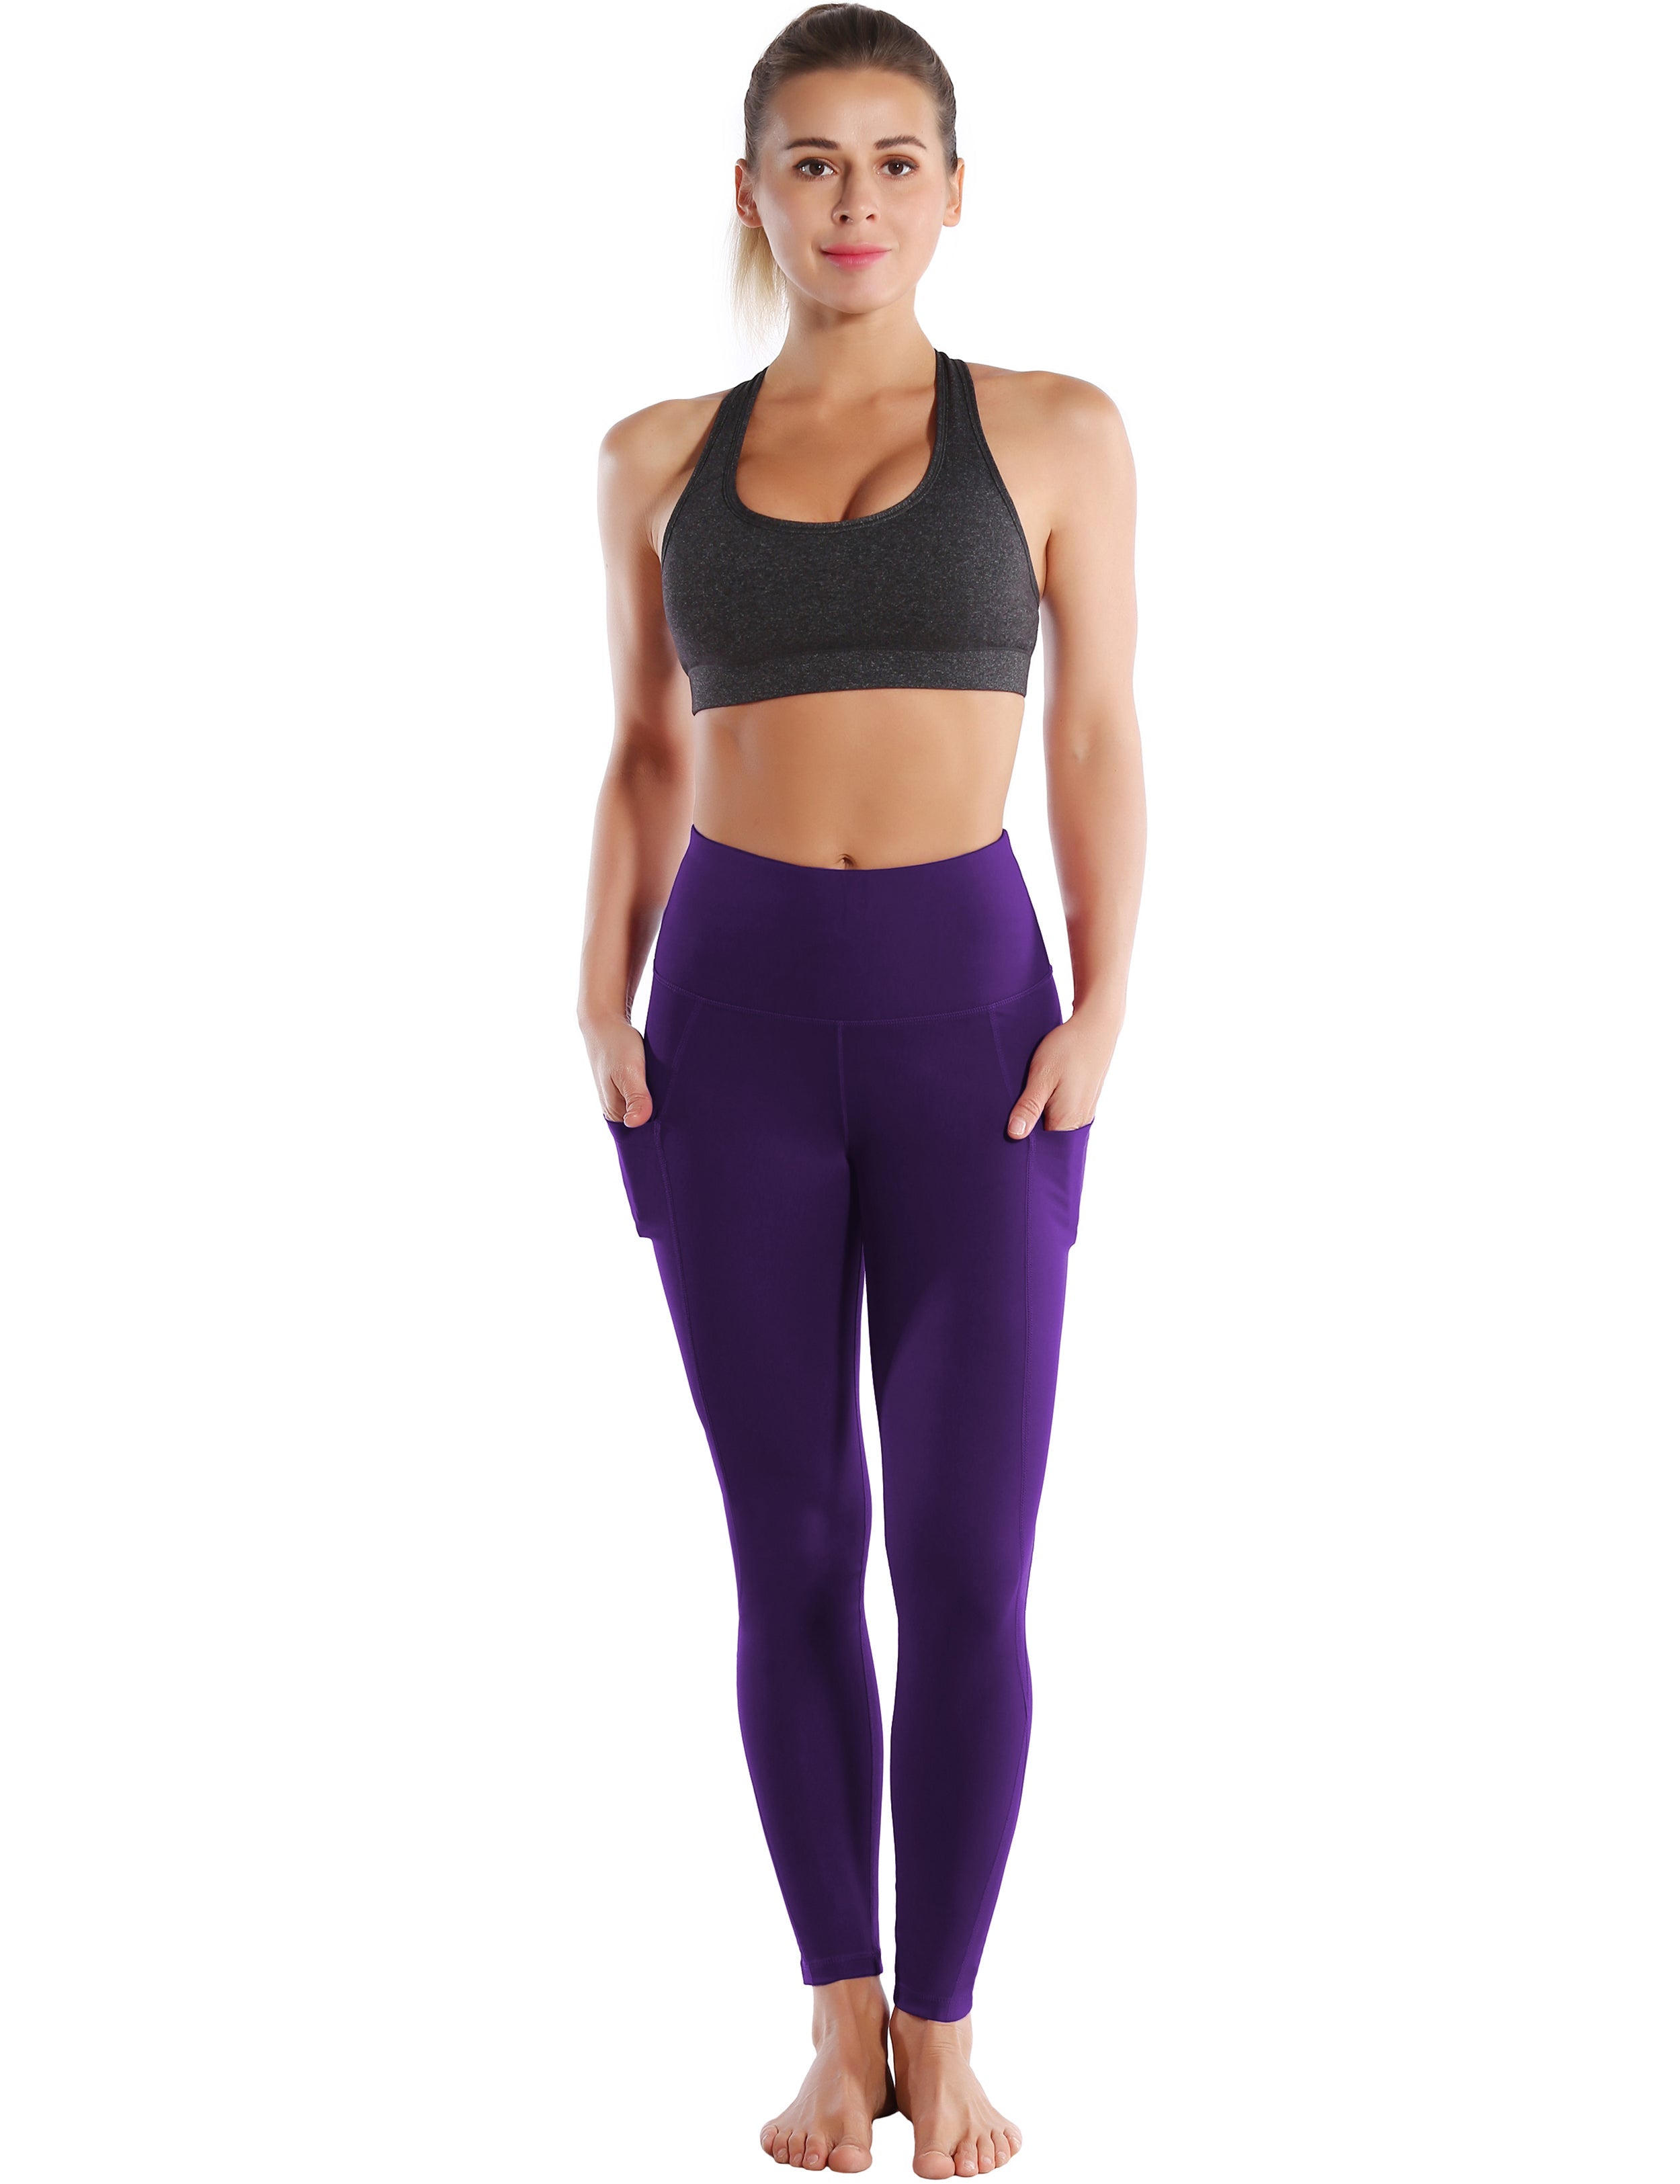 High Waist Side Pockets Tall Size Pants grapevine 75% Nylon, 25% Spandex Fabric doesn't attract lint easily 4-way stretch No see-through Moisture-wicking Tummy control Inner pocket